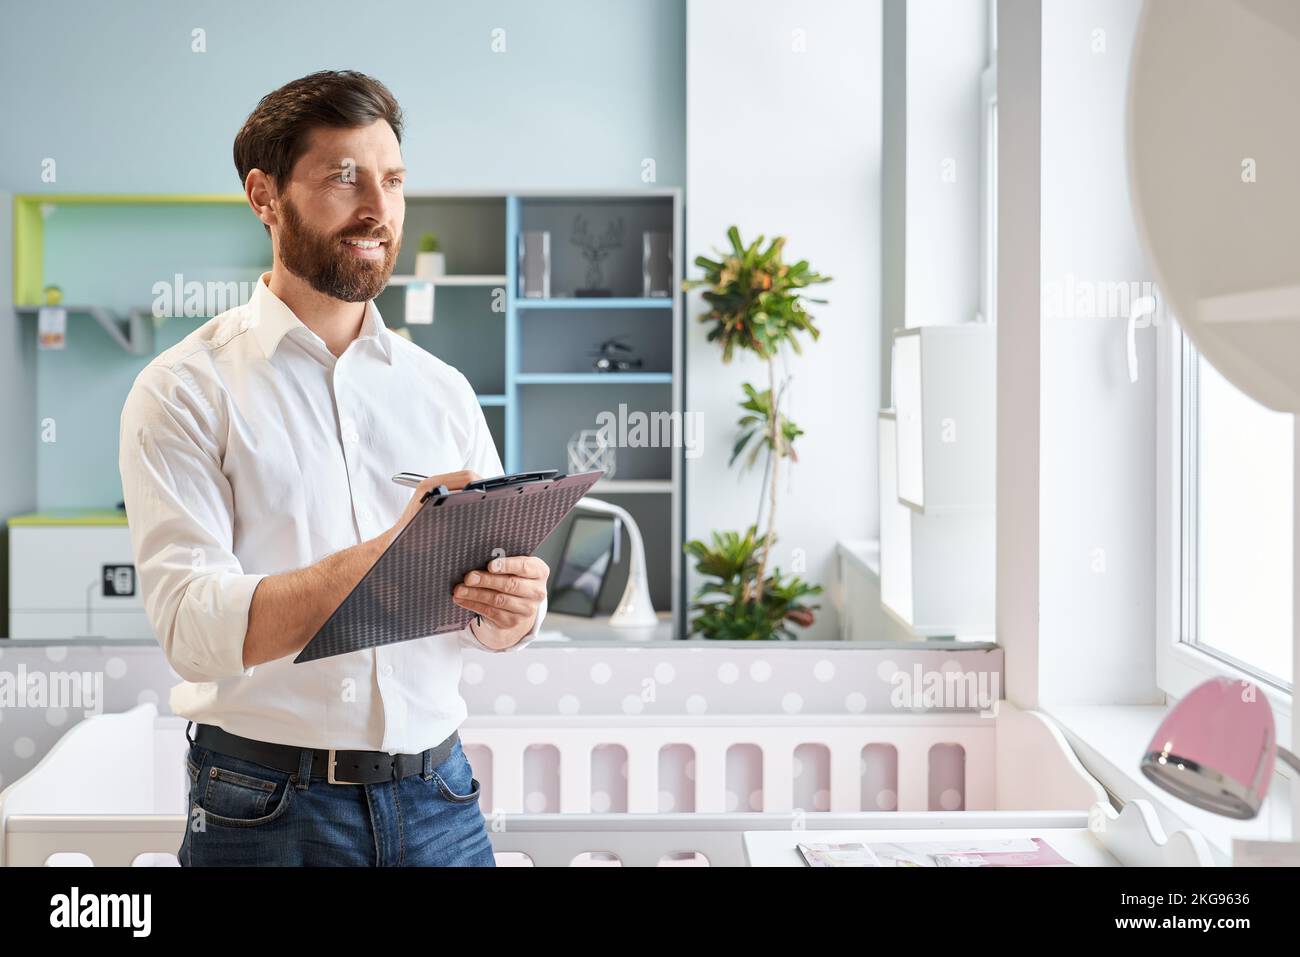 Successful sales manager standing with clip-on tablet in furniture store. Portrait of smiling retailer writing, compare prices, while looking at cupbo Stock Photo